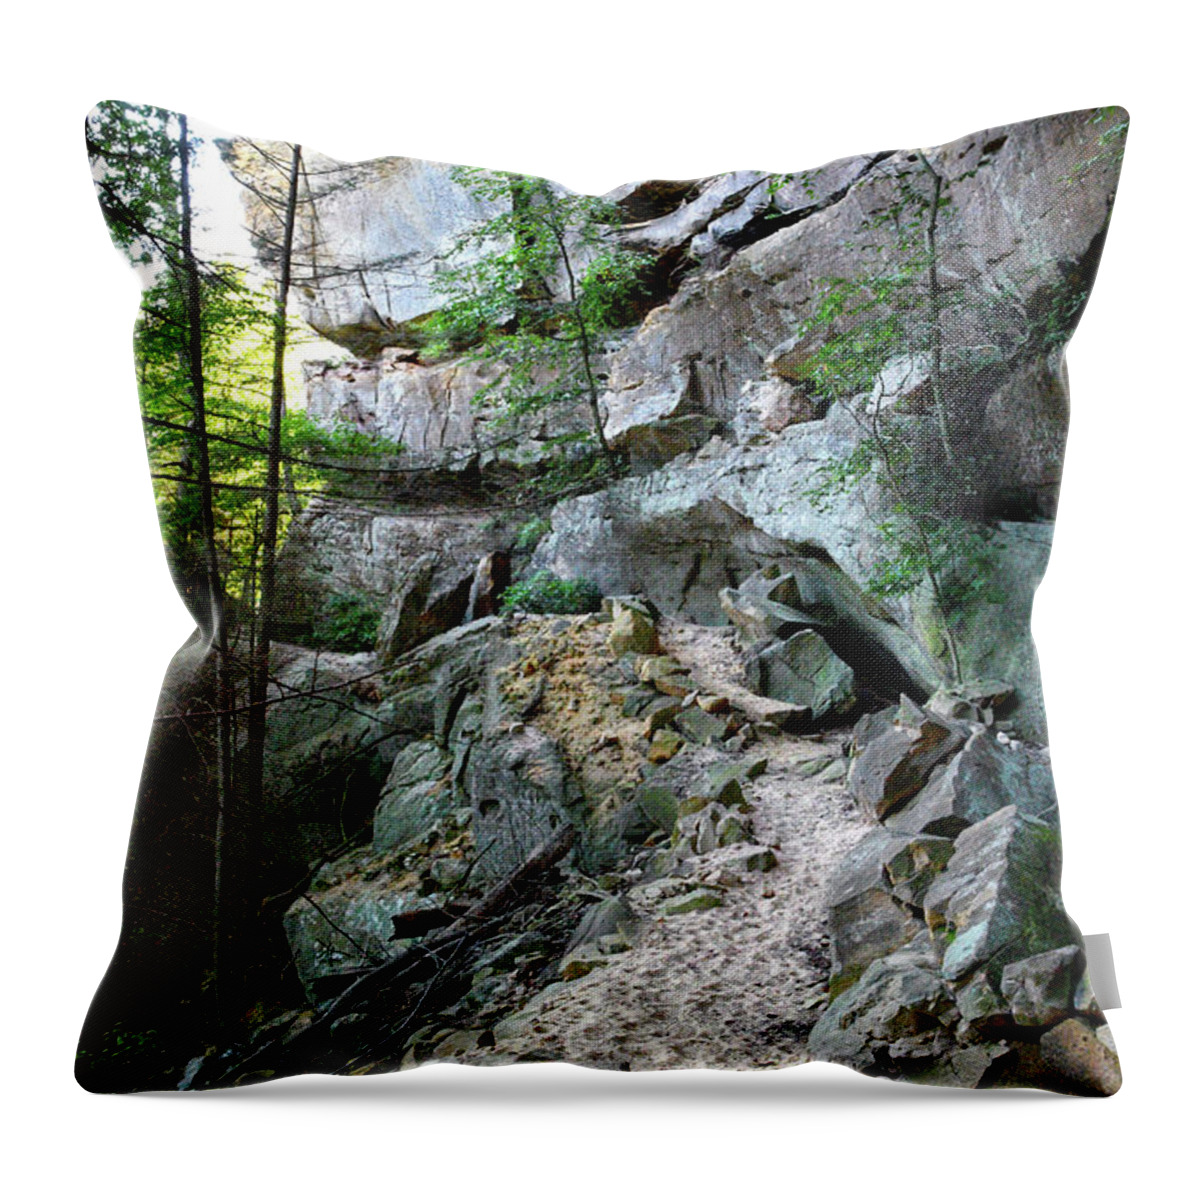 Pogue Creek Canyon Throw Pillow featuring the photograph Unnamed Rock Face 7 by Phil Perkins